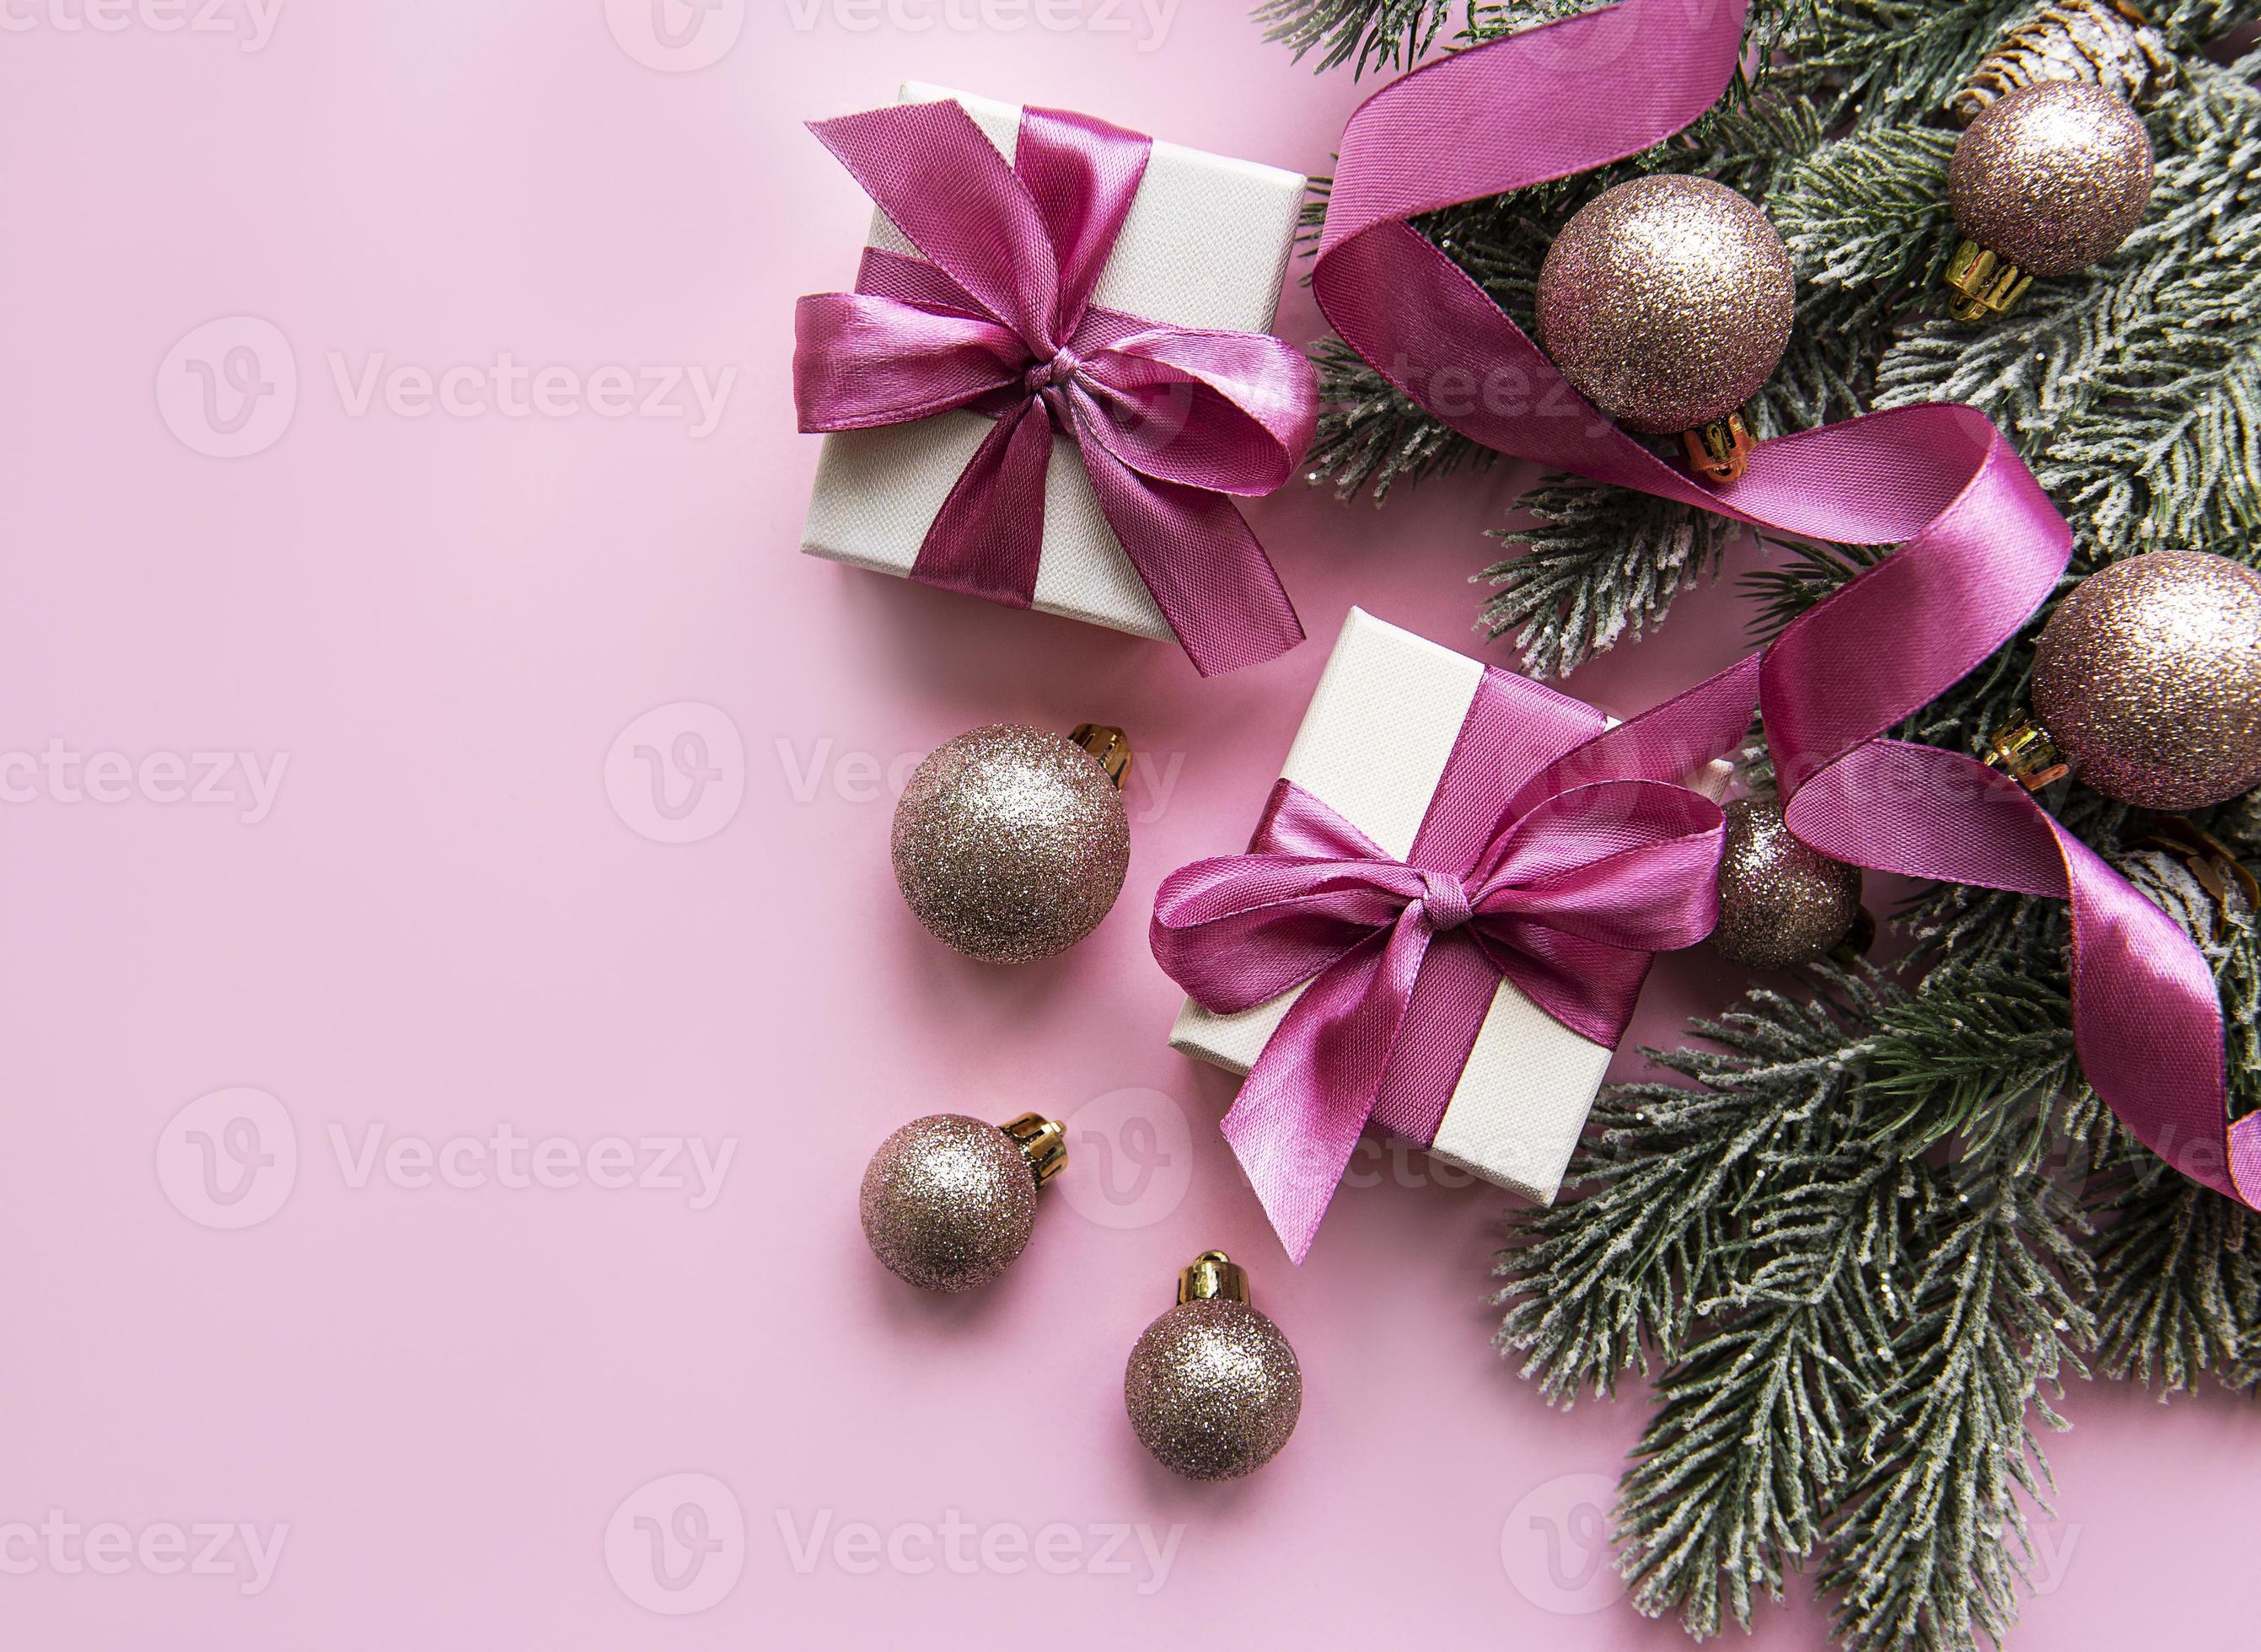 Christmas gifts, pink decorations on pastel pink background